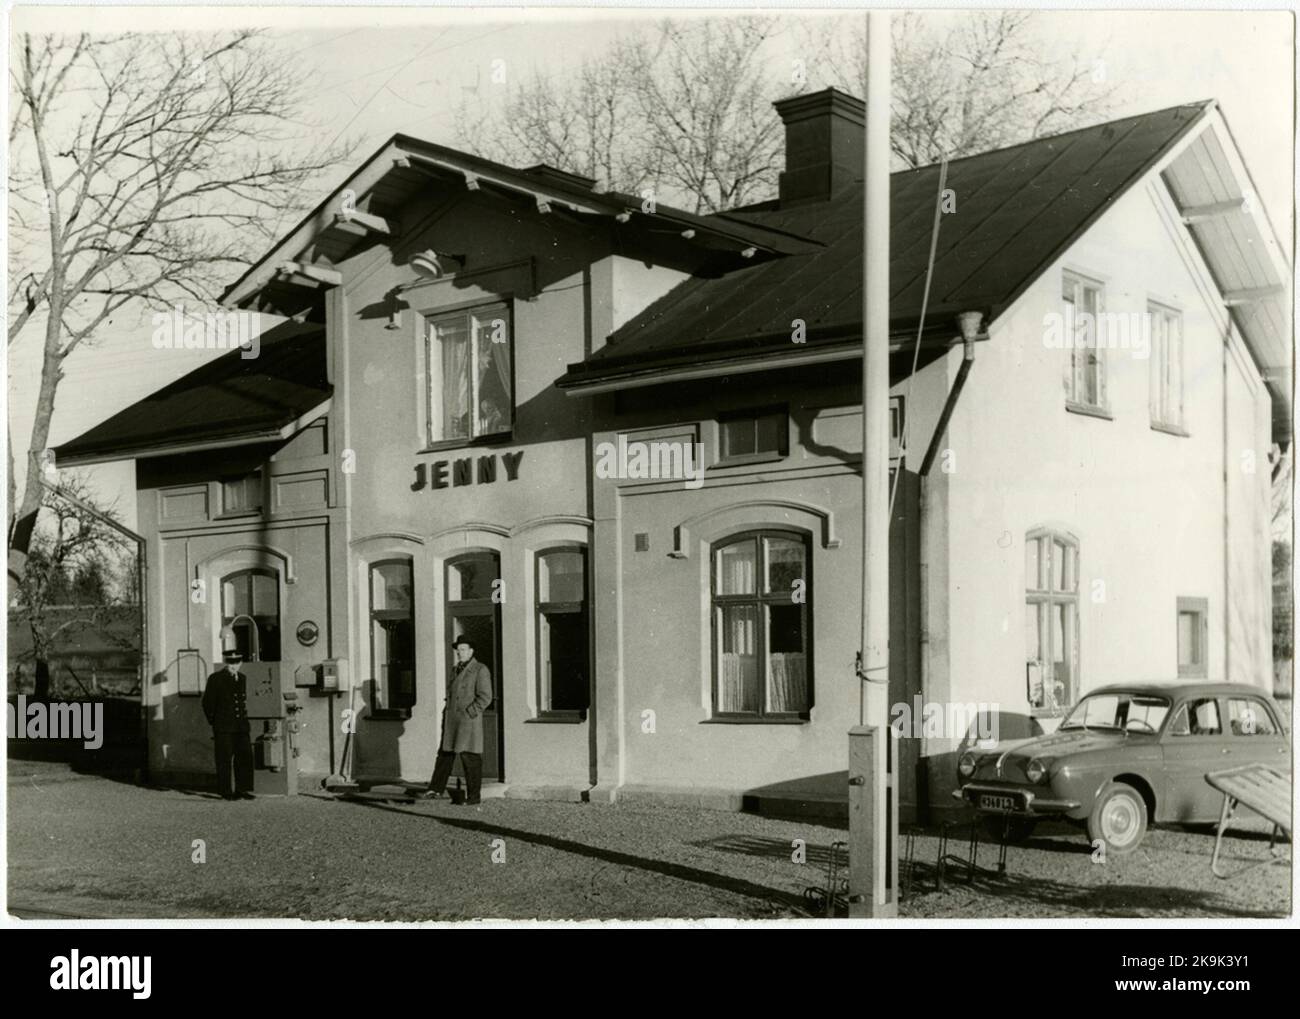 Station in Jenny. The car is a Renault Dauphine. Stock Photo